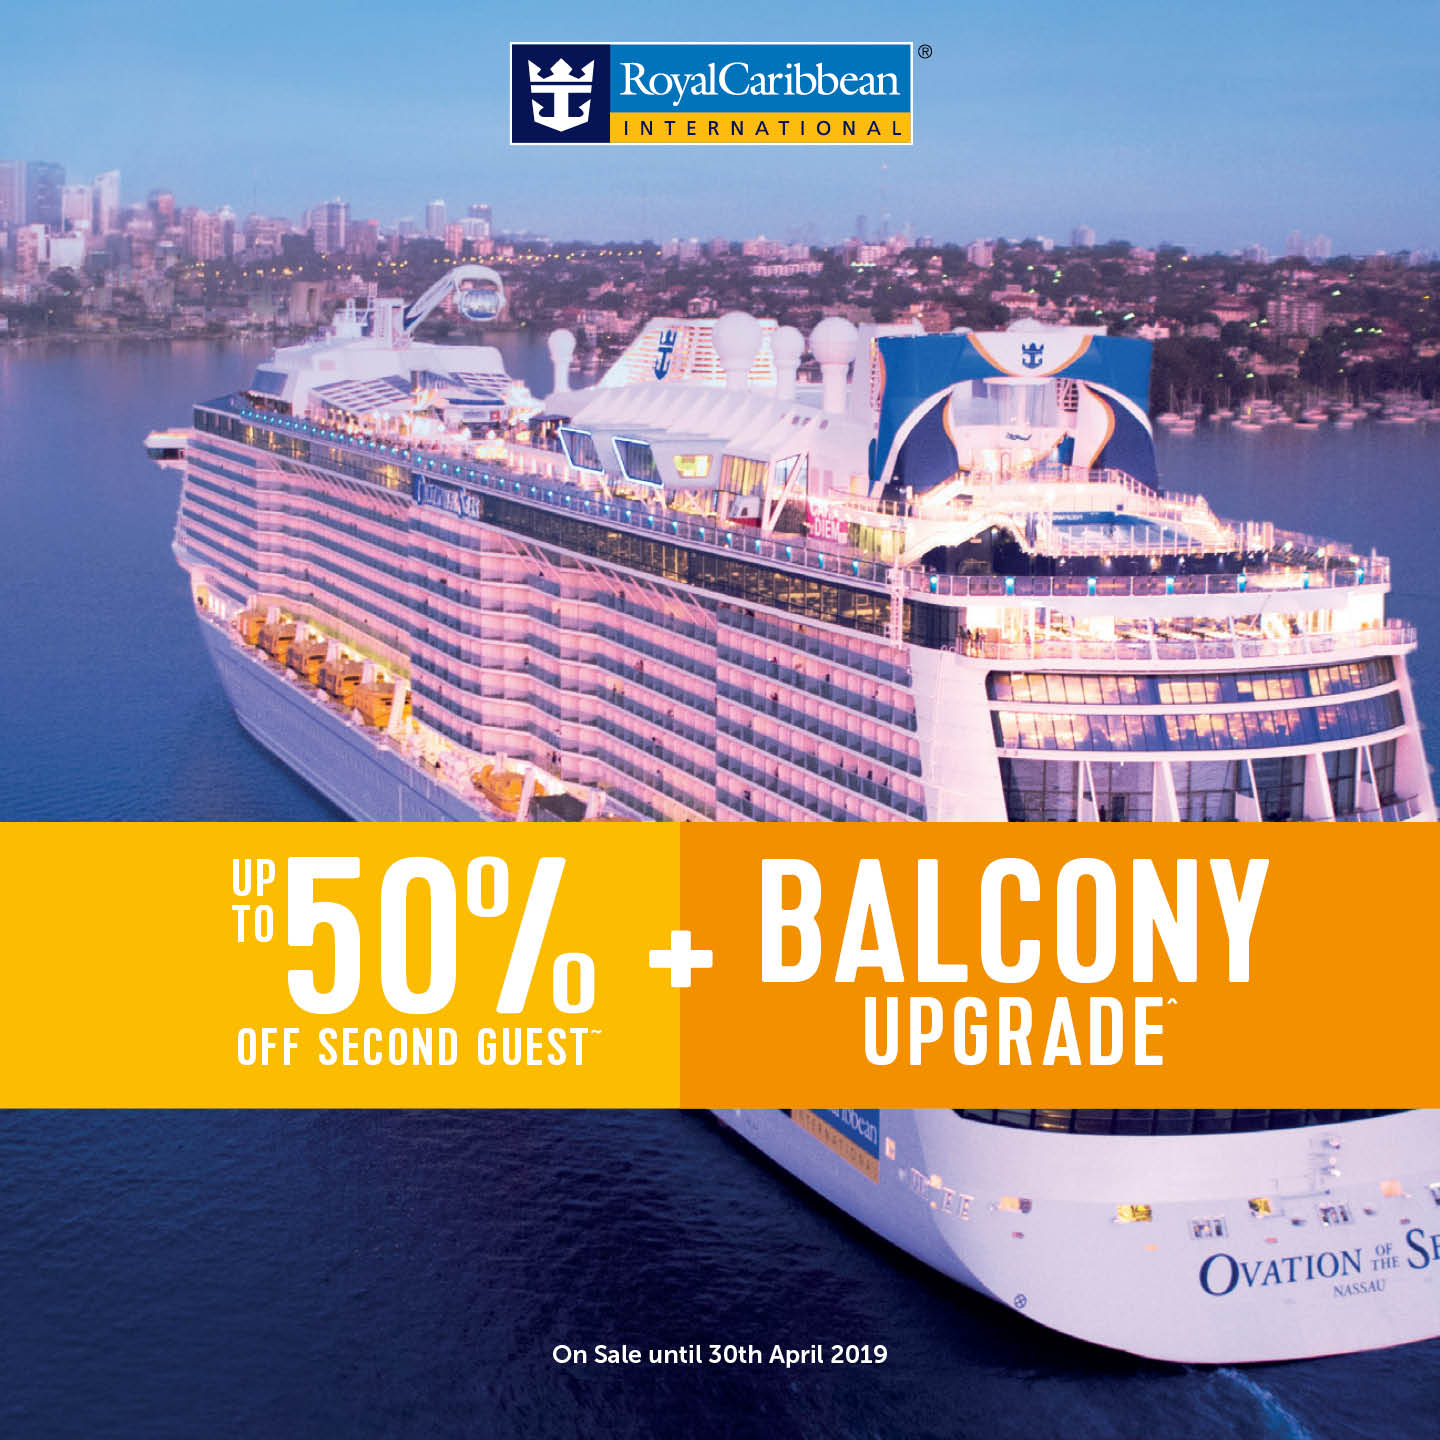 royal caribbean cruise agent discount